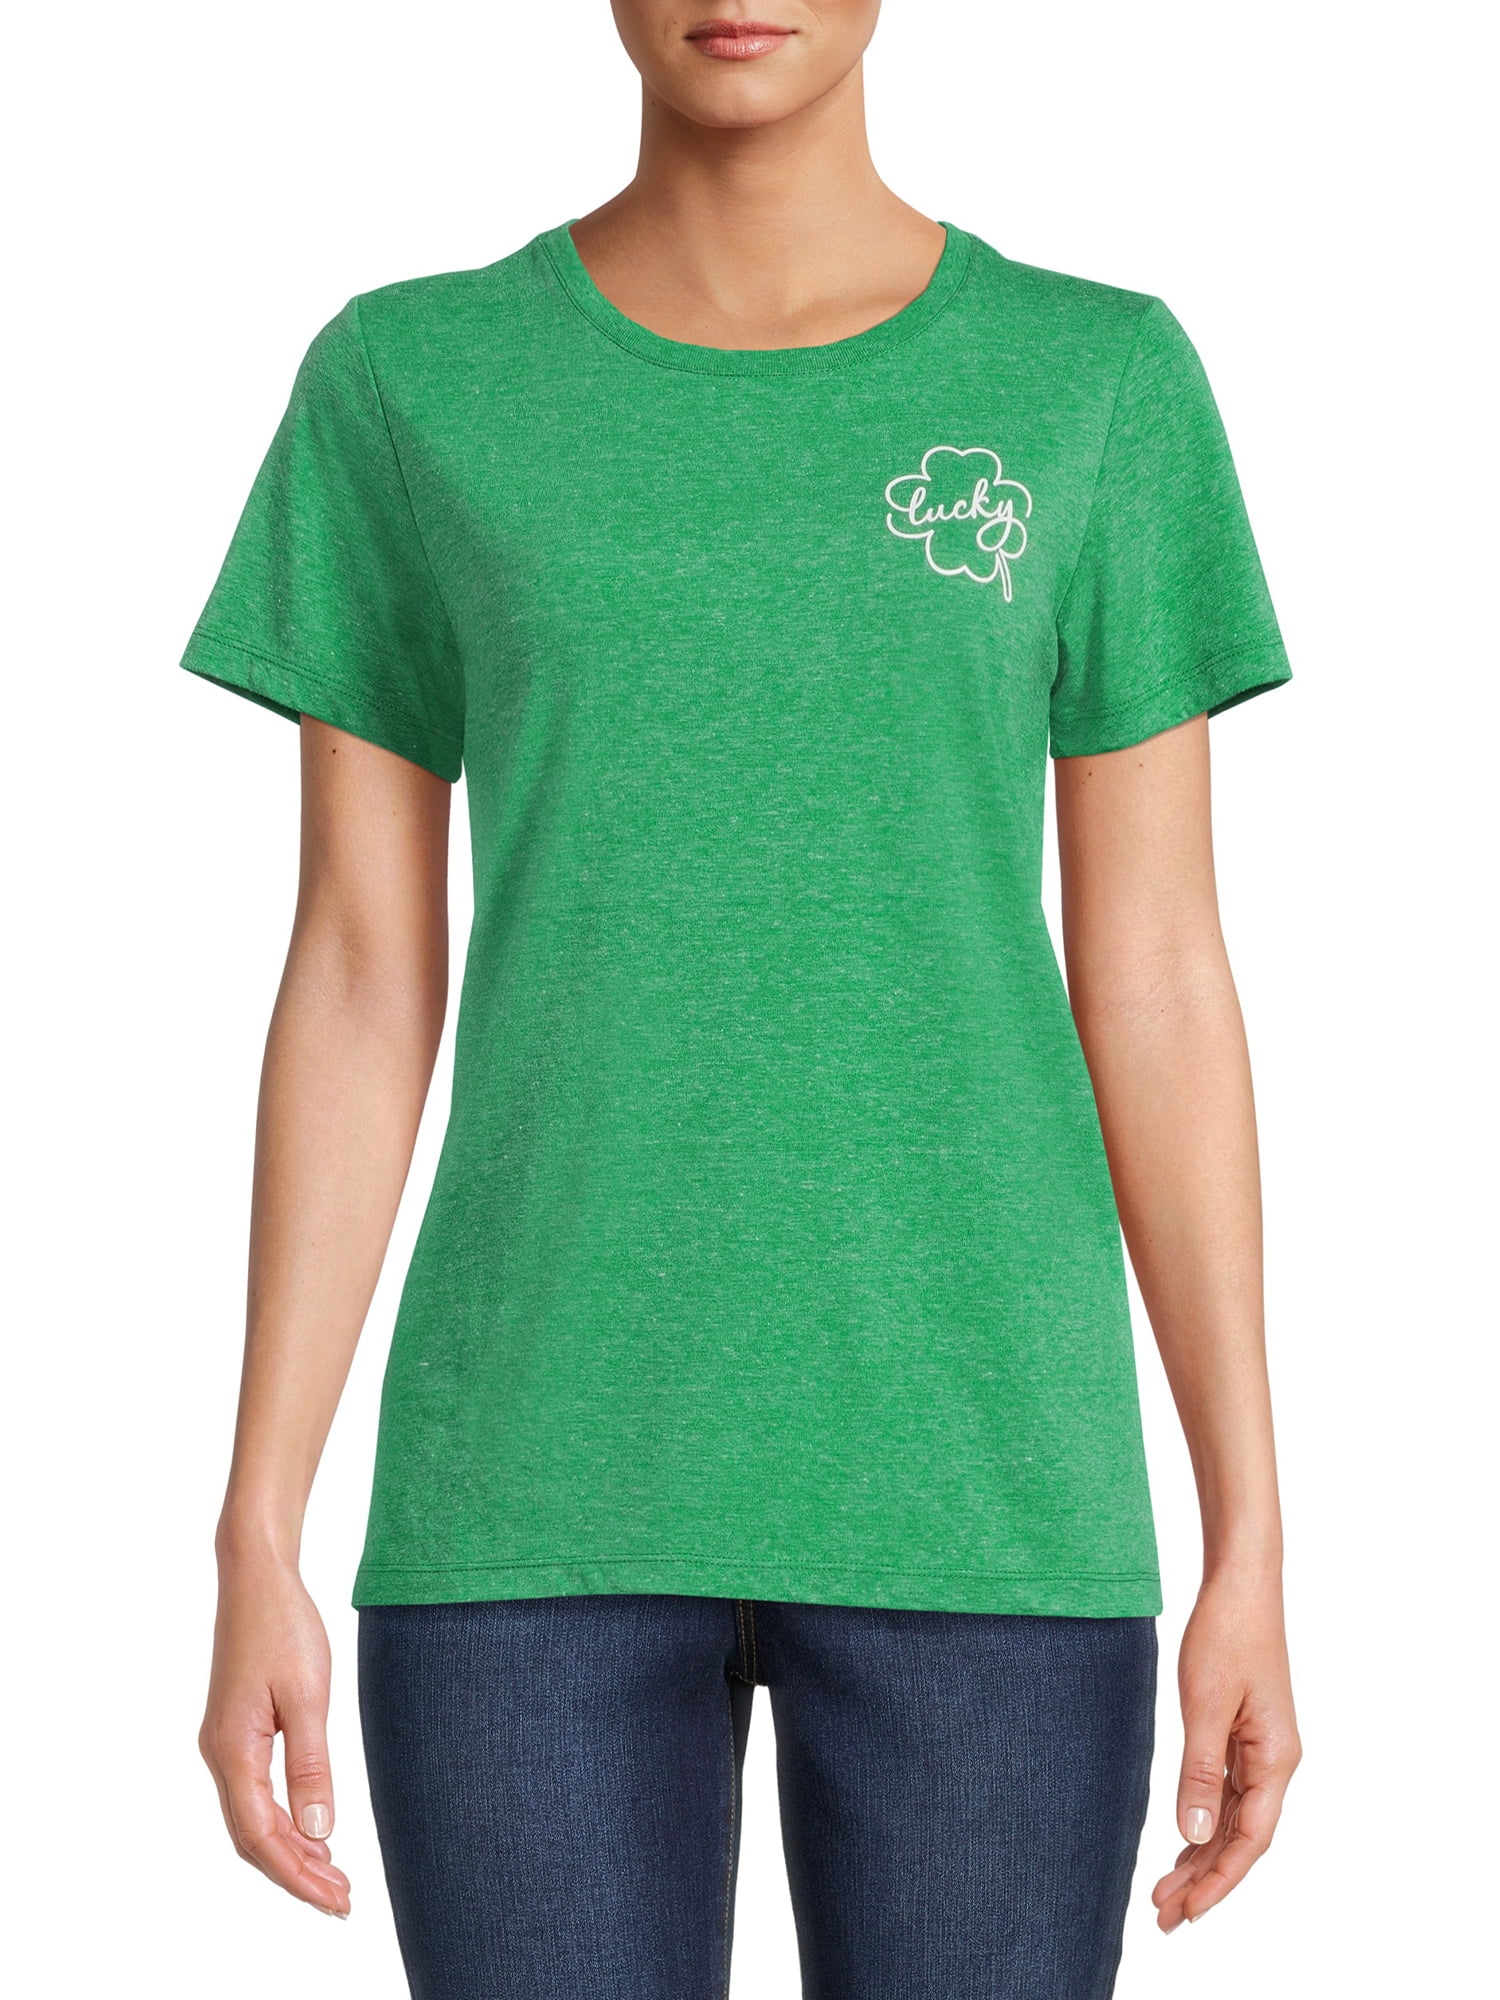 Way to Celebrate Women's Lucky Graphic T-Shirt